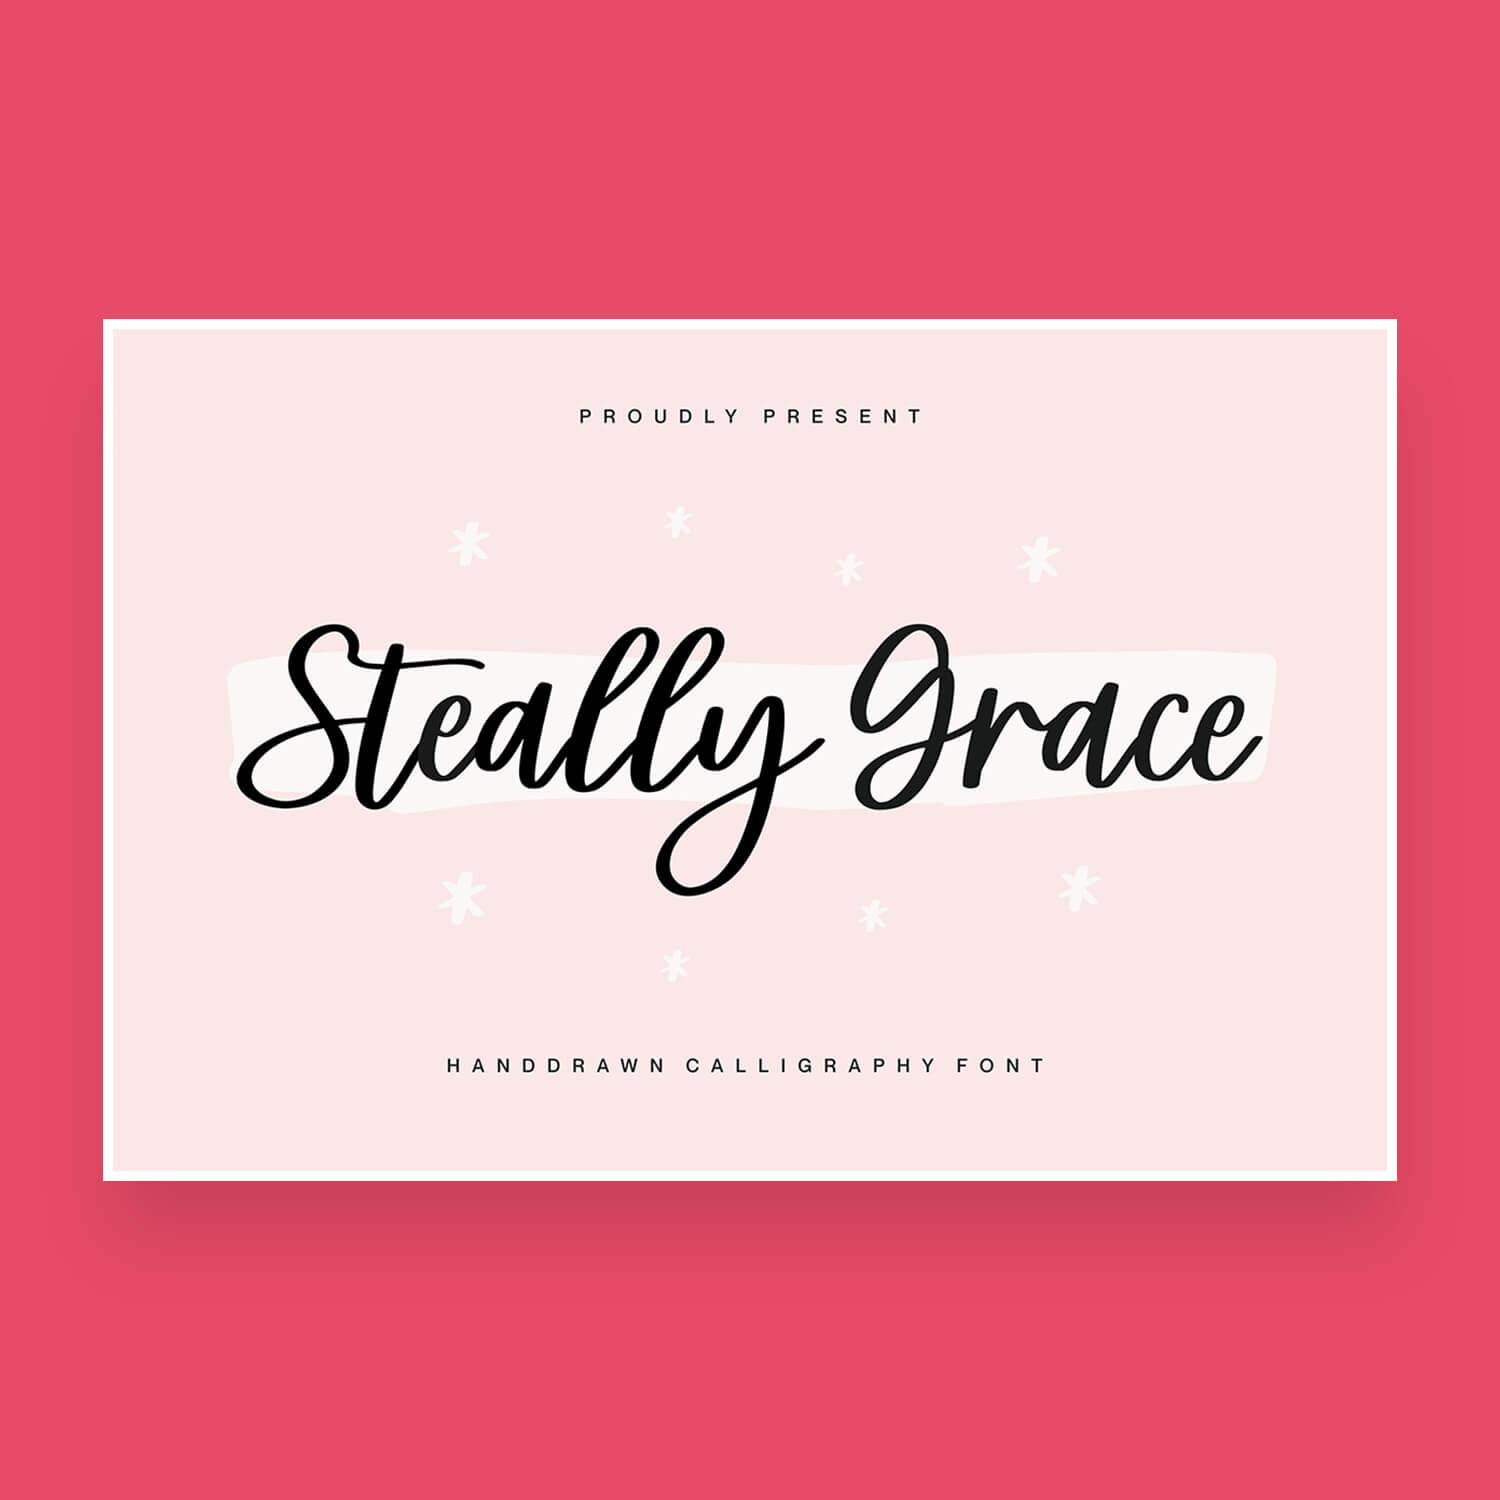 steally grace handdrawn calligraphy font cover image.